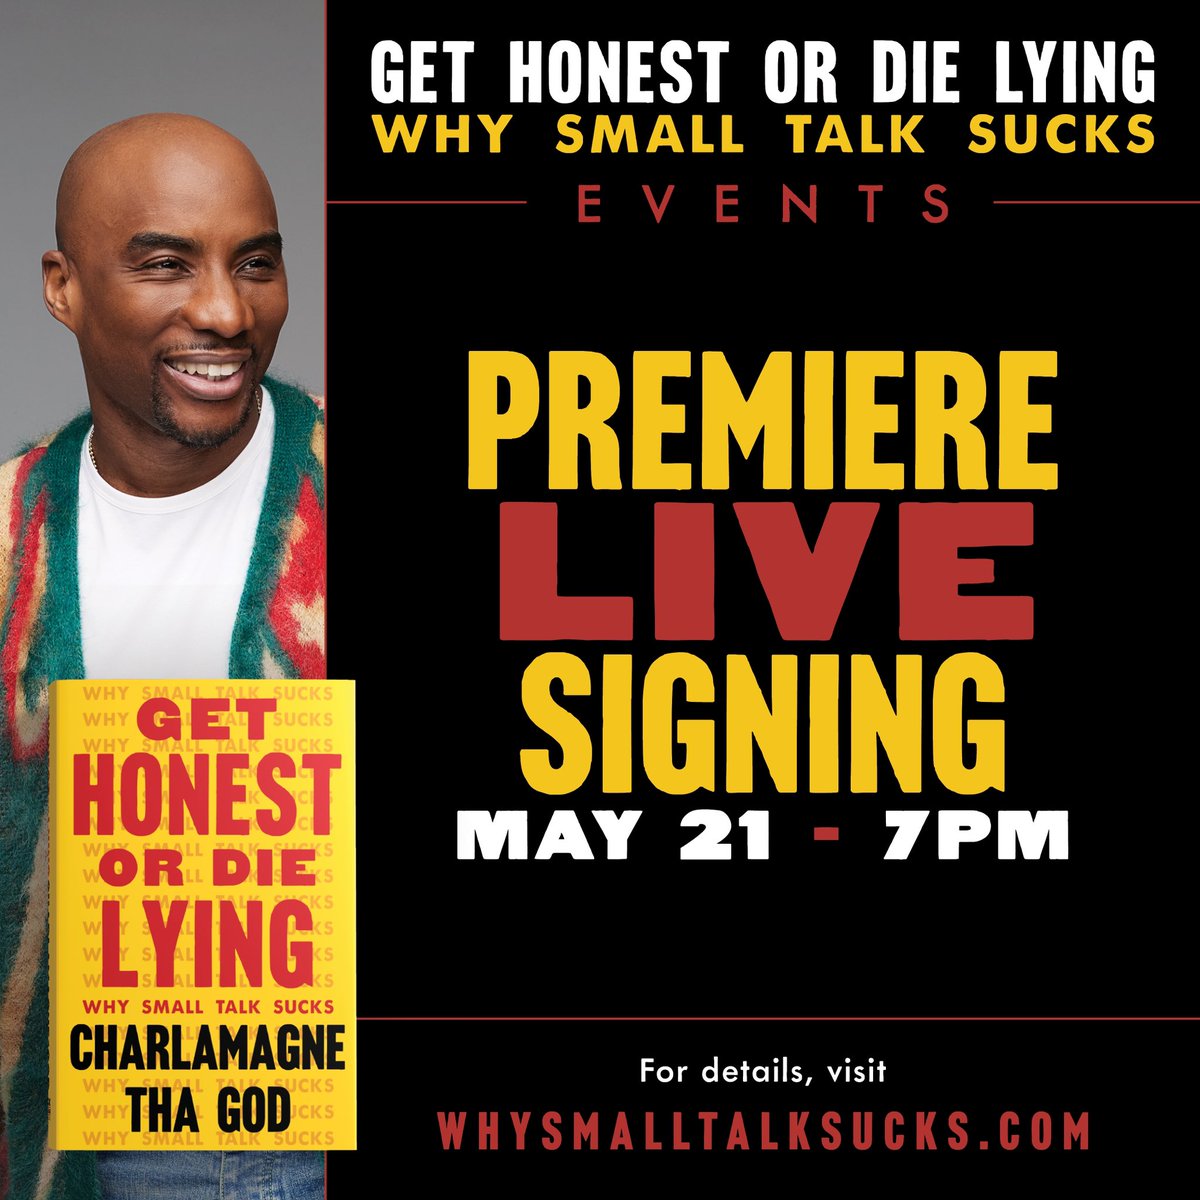 I will be on @PCollectibles for a live signing on May 21st at 7pm!! For more details head to premierecollectibles.com/gethonest #WhySmallTalkSucks